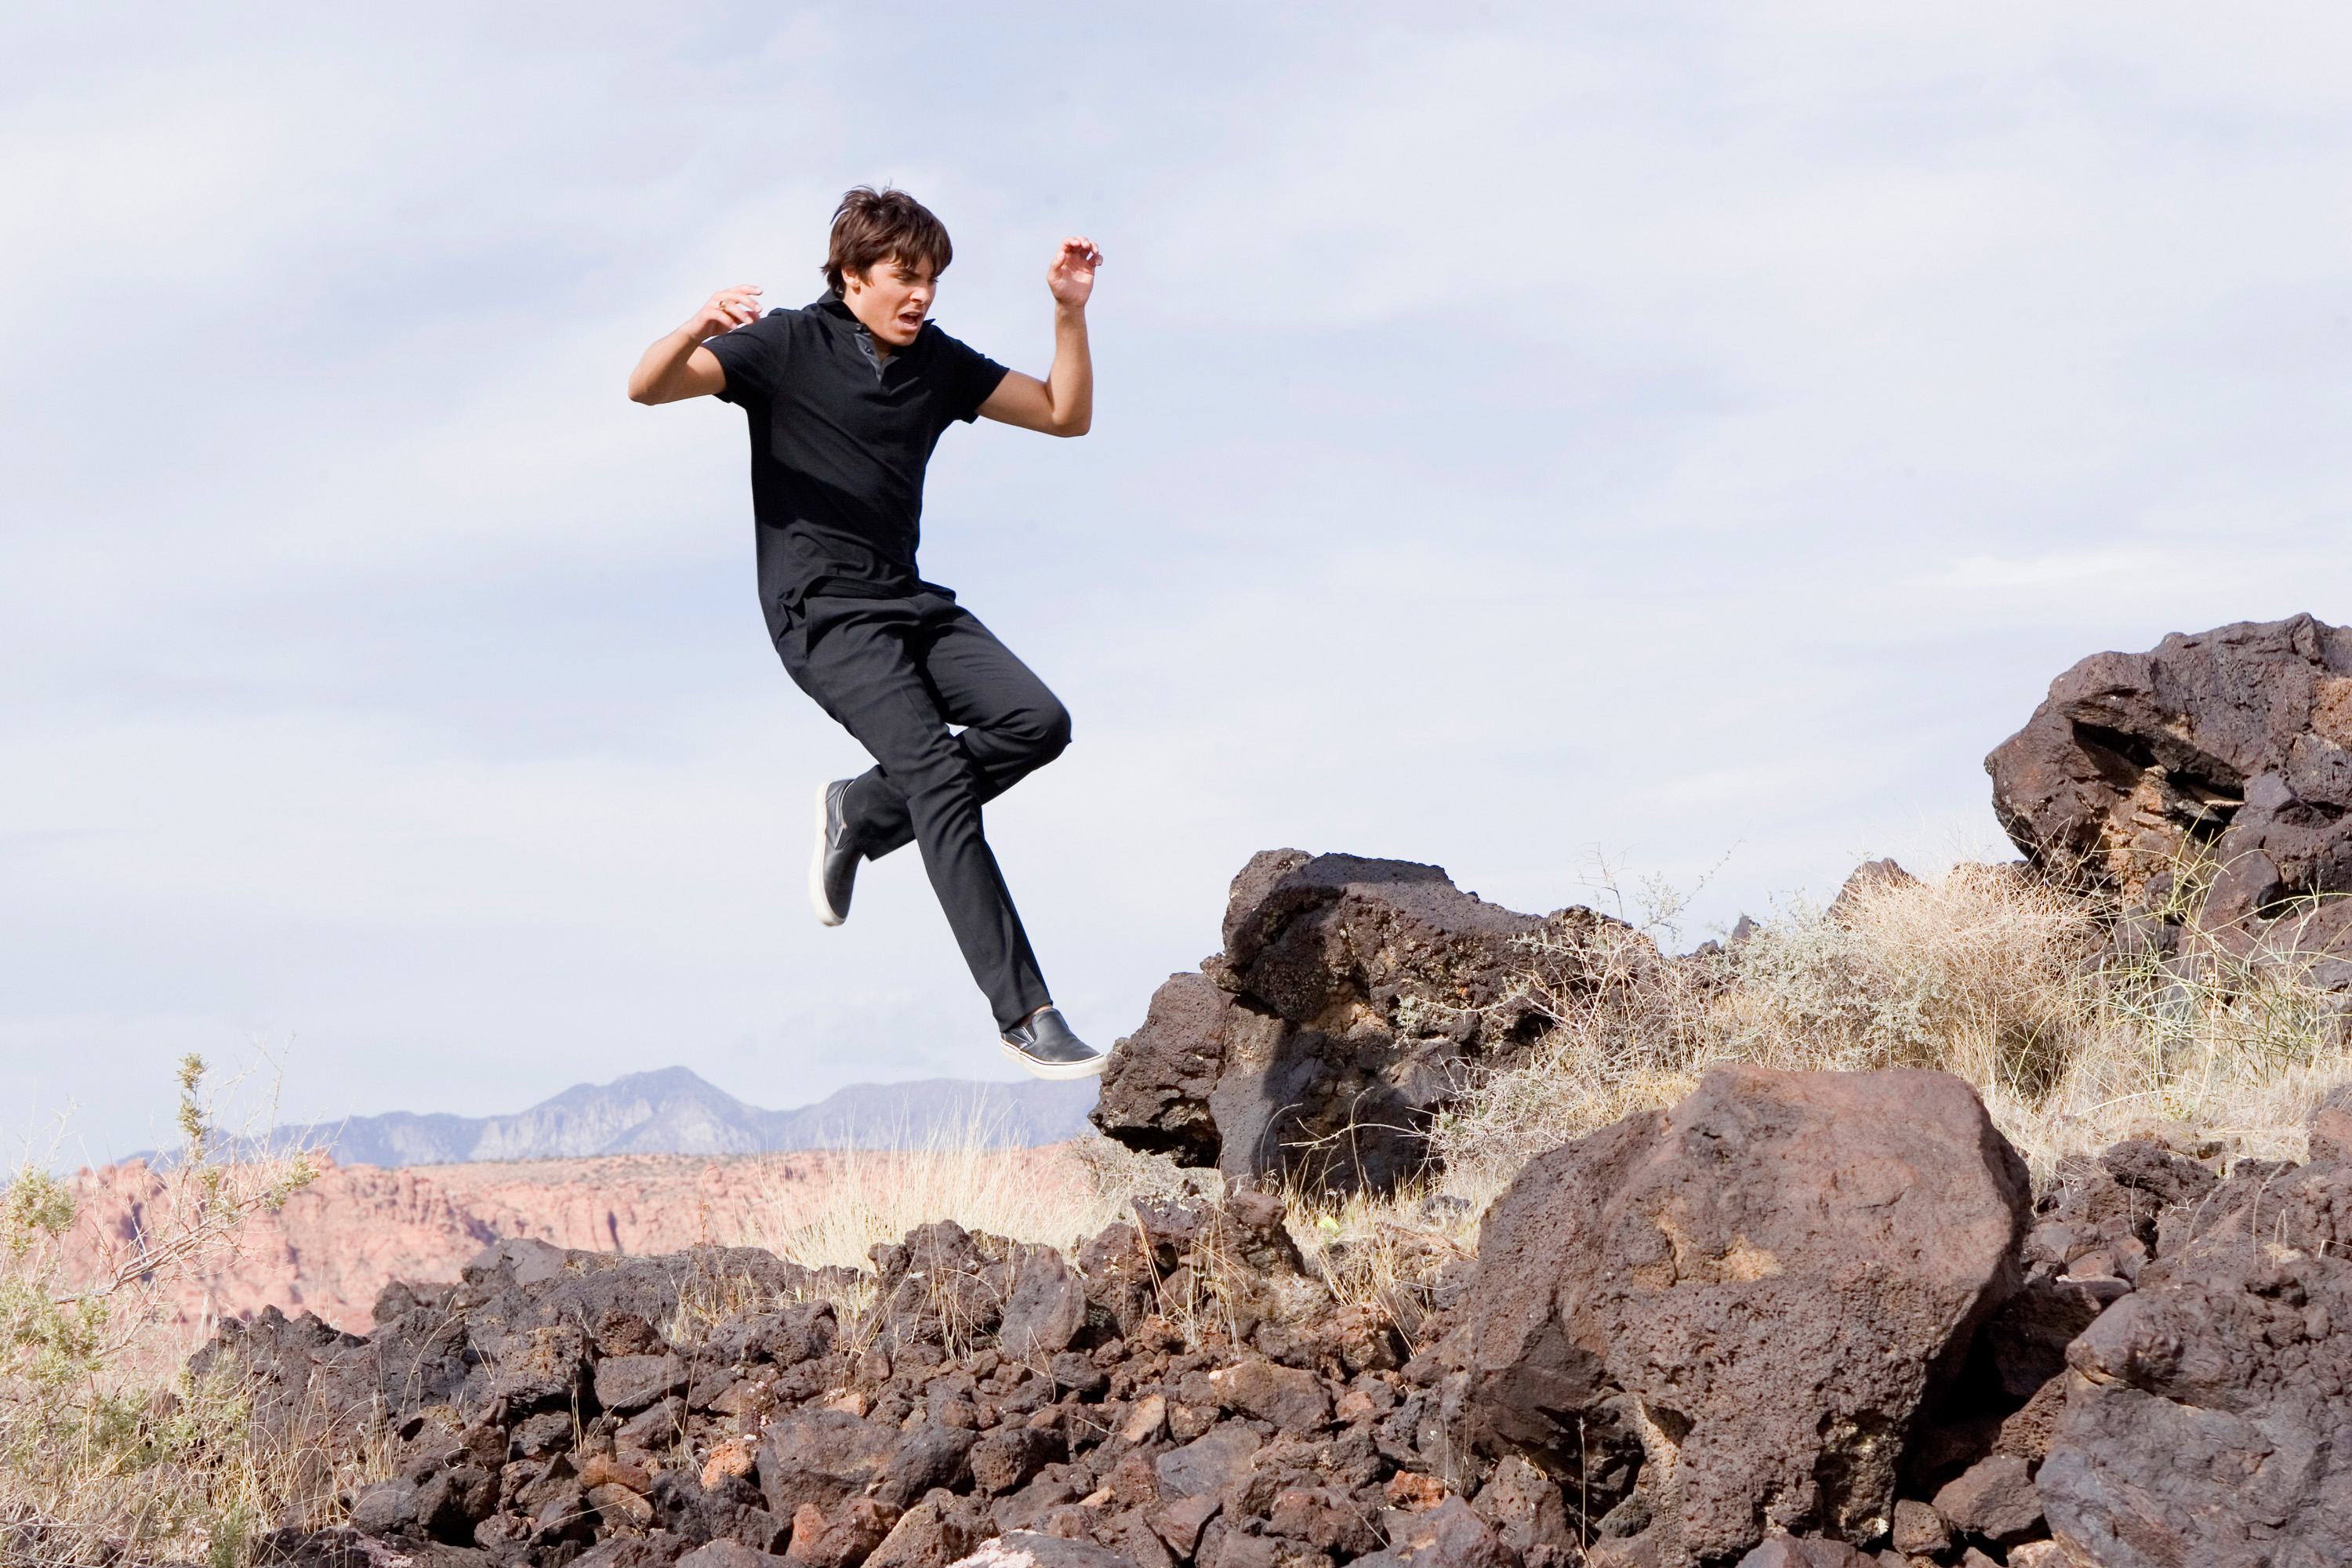 A person dressed in a black T-shirt and black pants is captured mid-air while jumping over rocky terrain in an outdoor setting